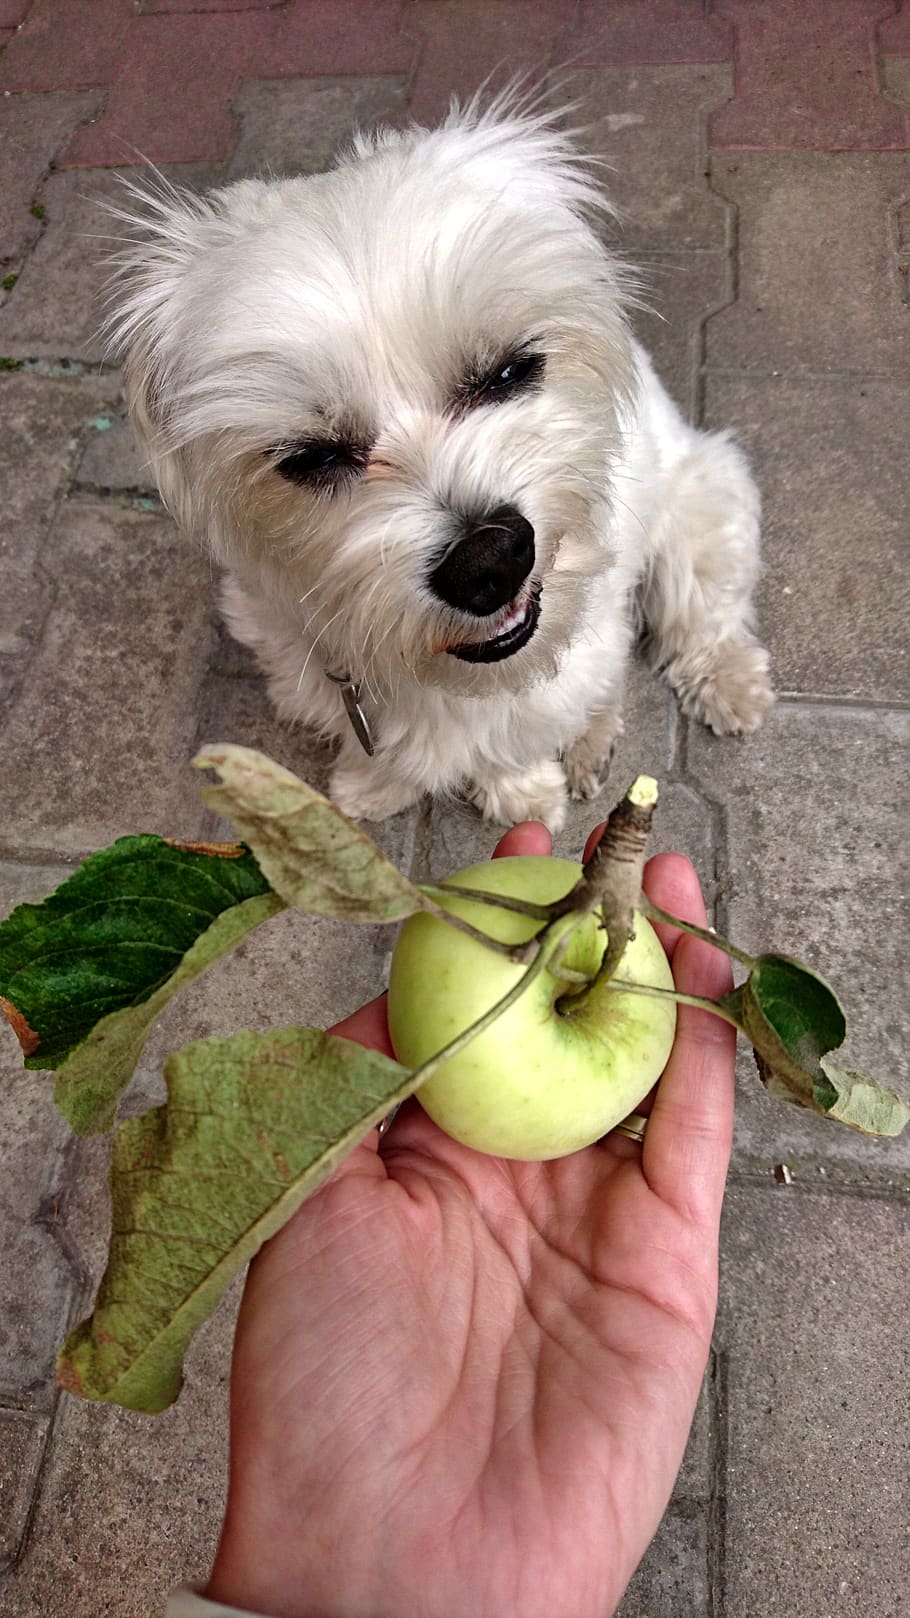 dog, diet, vegetarian food, pet, apple, the hand, give, fruit, one animal, holding